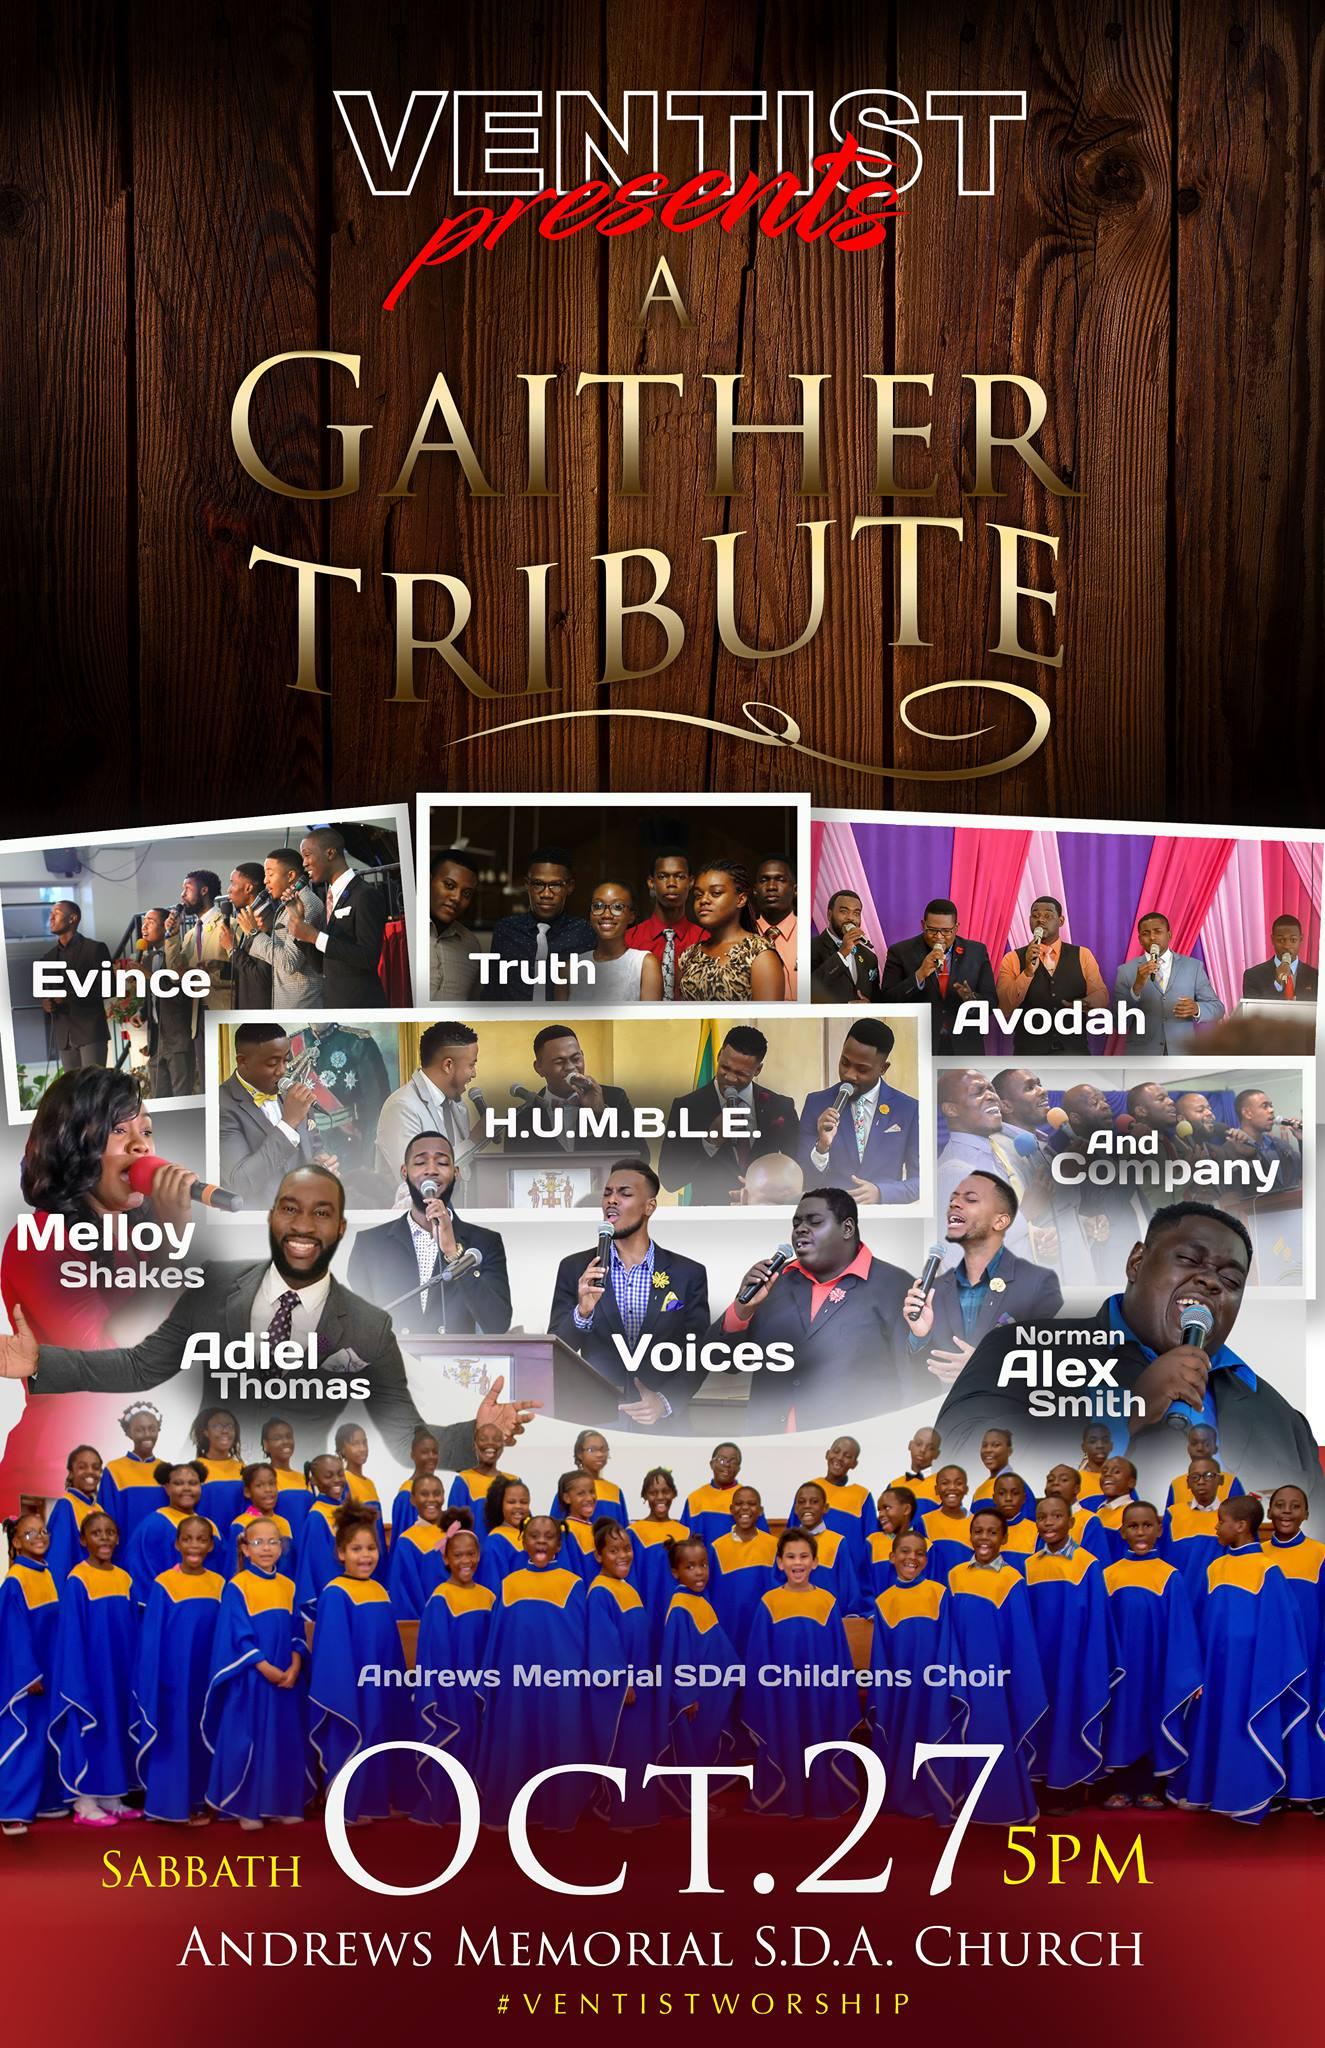 A Gaither Tribute